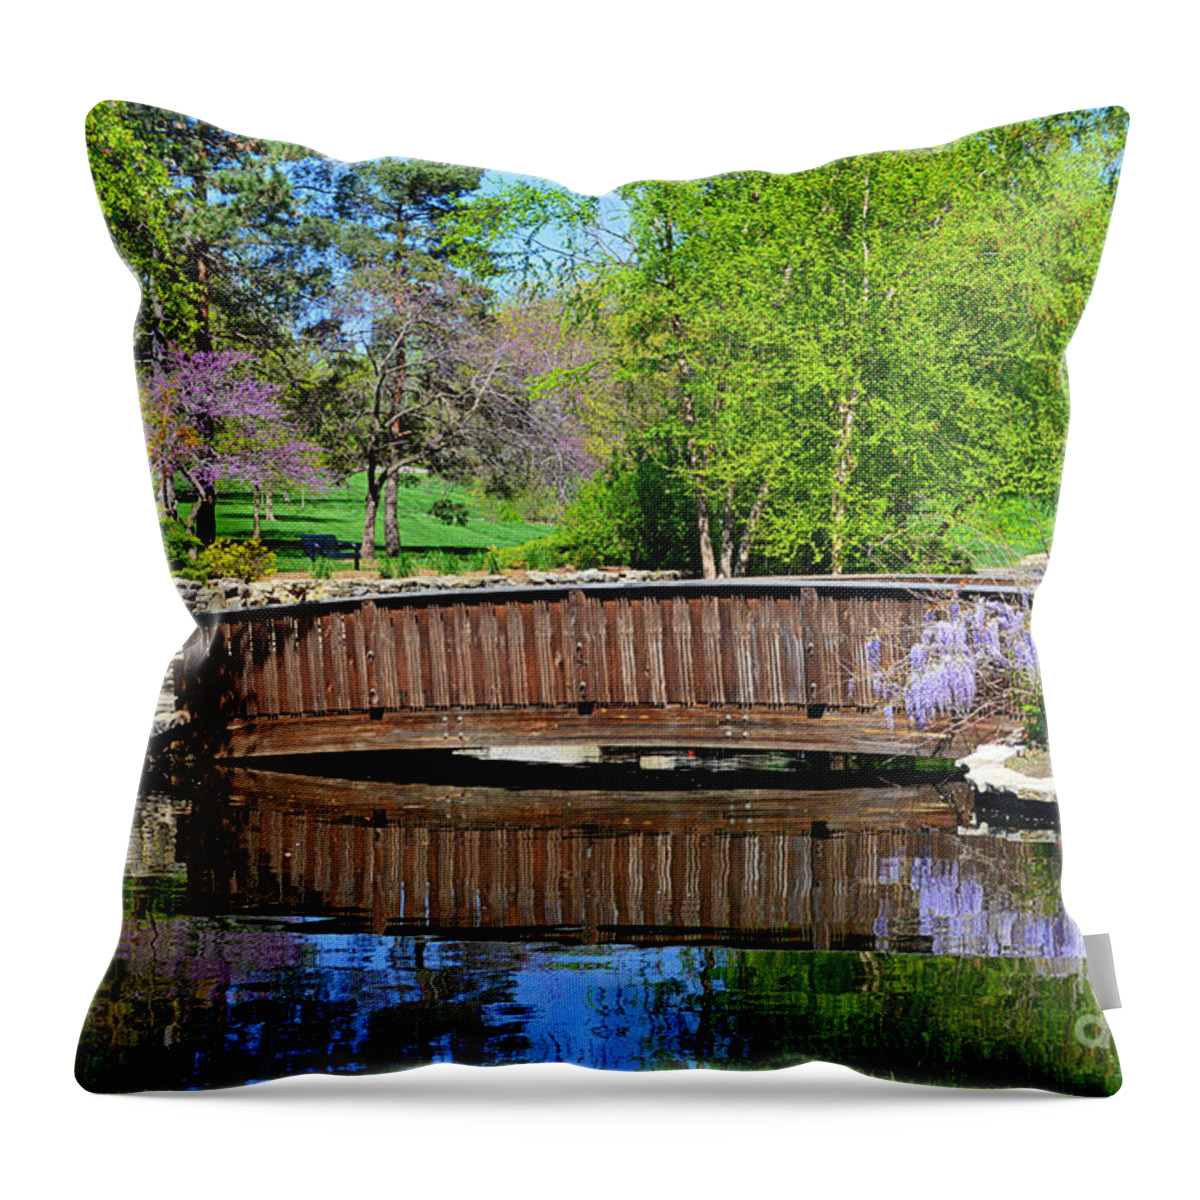 Wisteria Throw Pillow featuring the photograph Wisteria in Bloom at Loose Park Bridge by Catherine Sherman